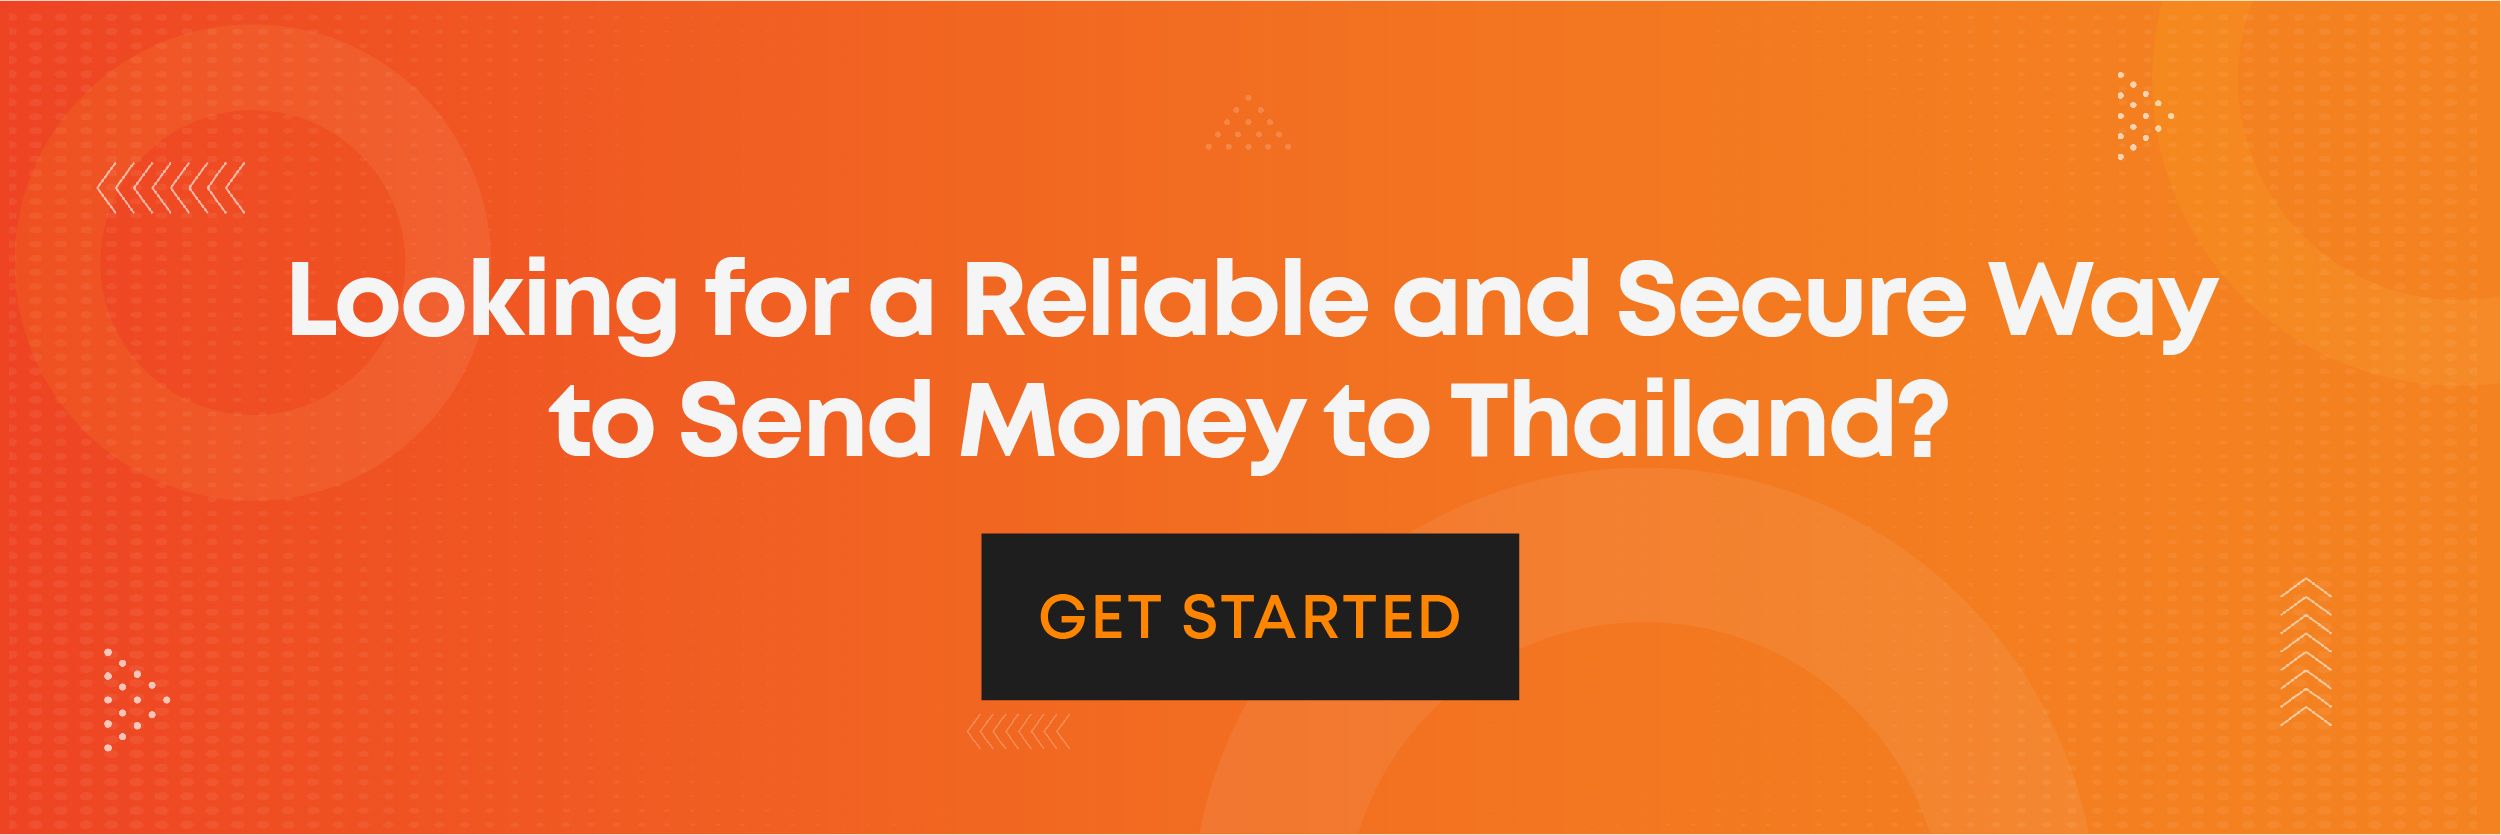 Looking for a reliable and secure way to send money to Thailand?